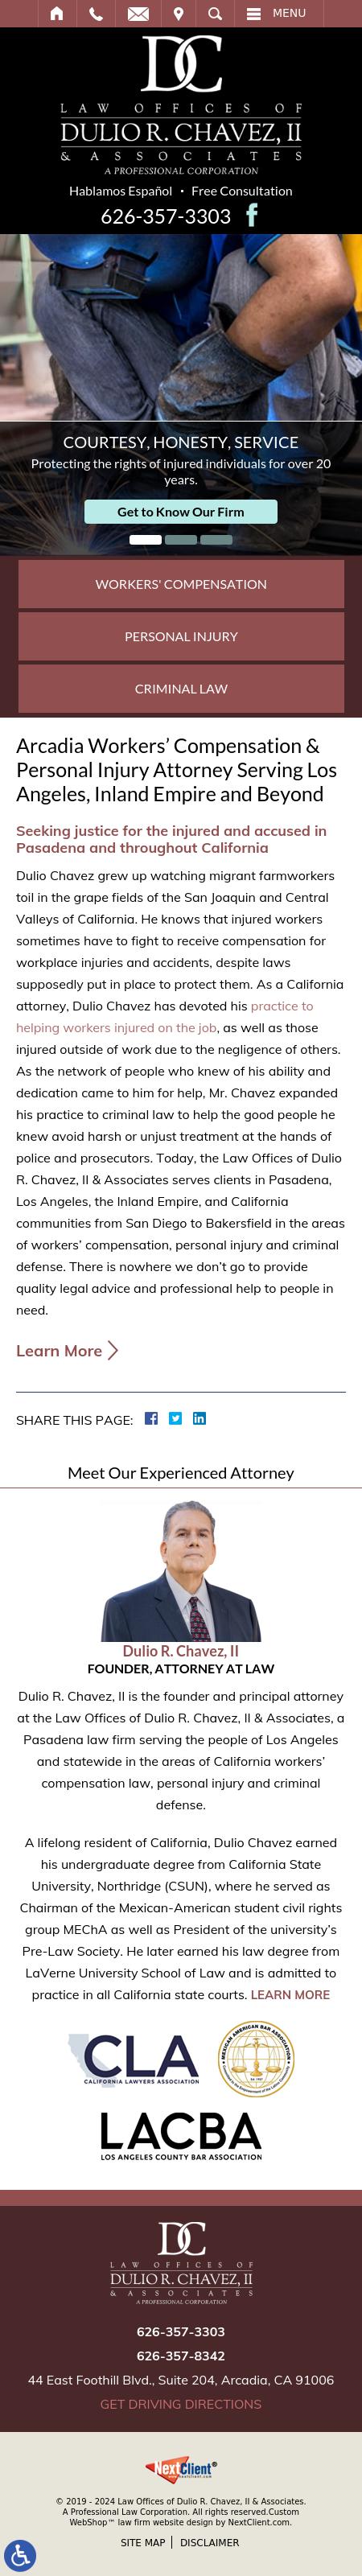 Law Offices of Dulio R. Chavez, II & Associates - Arcadia CA Lawyers